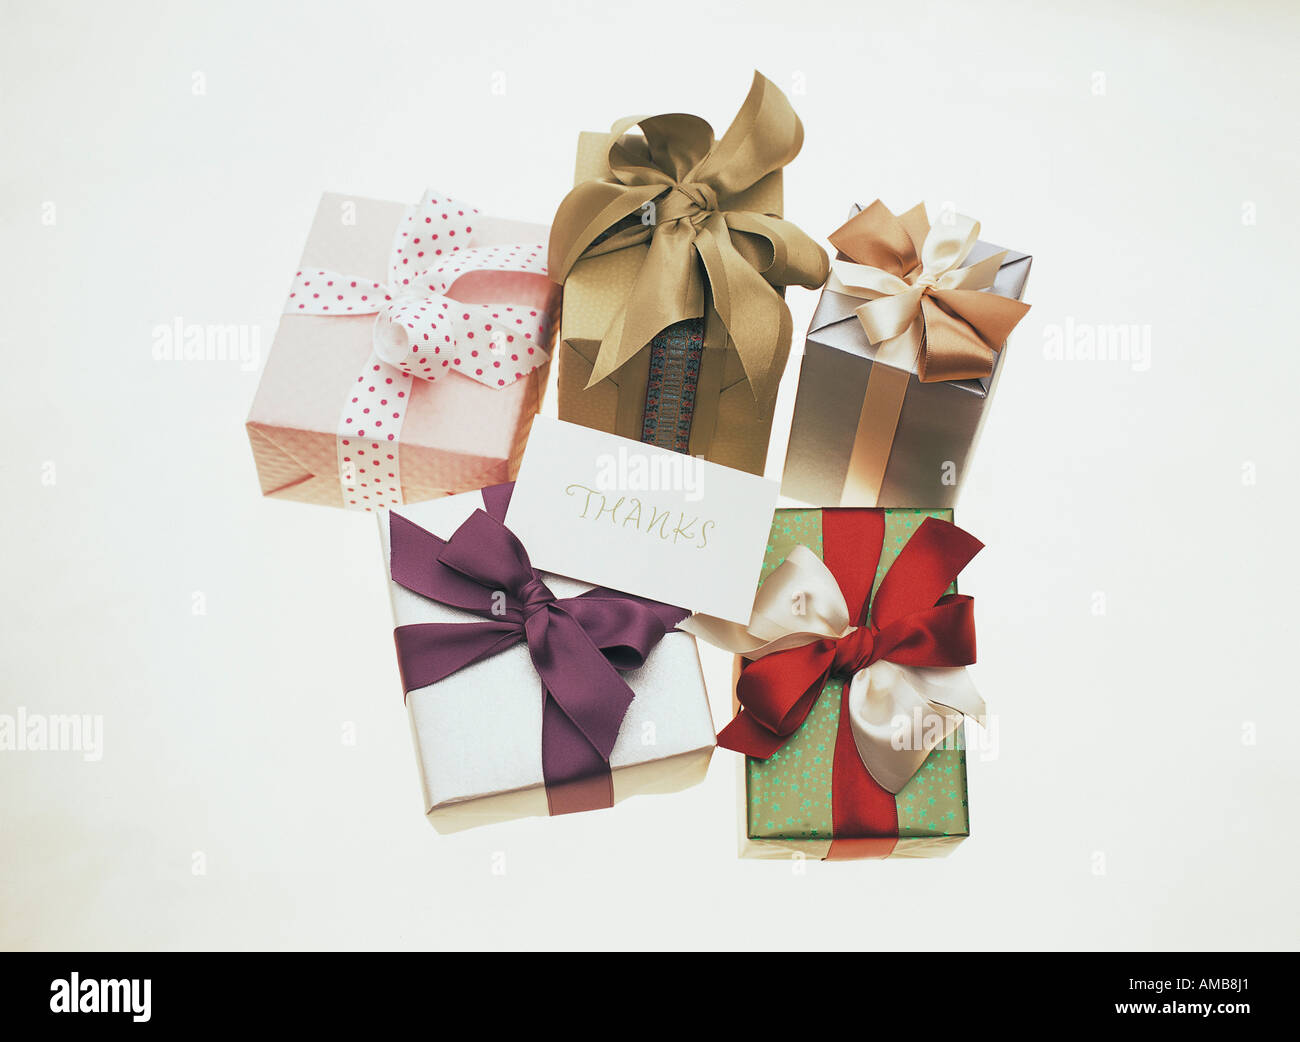 Gift Images Stock Photo